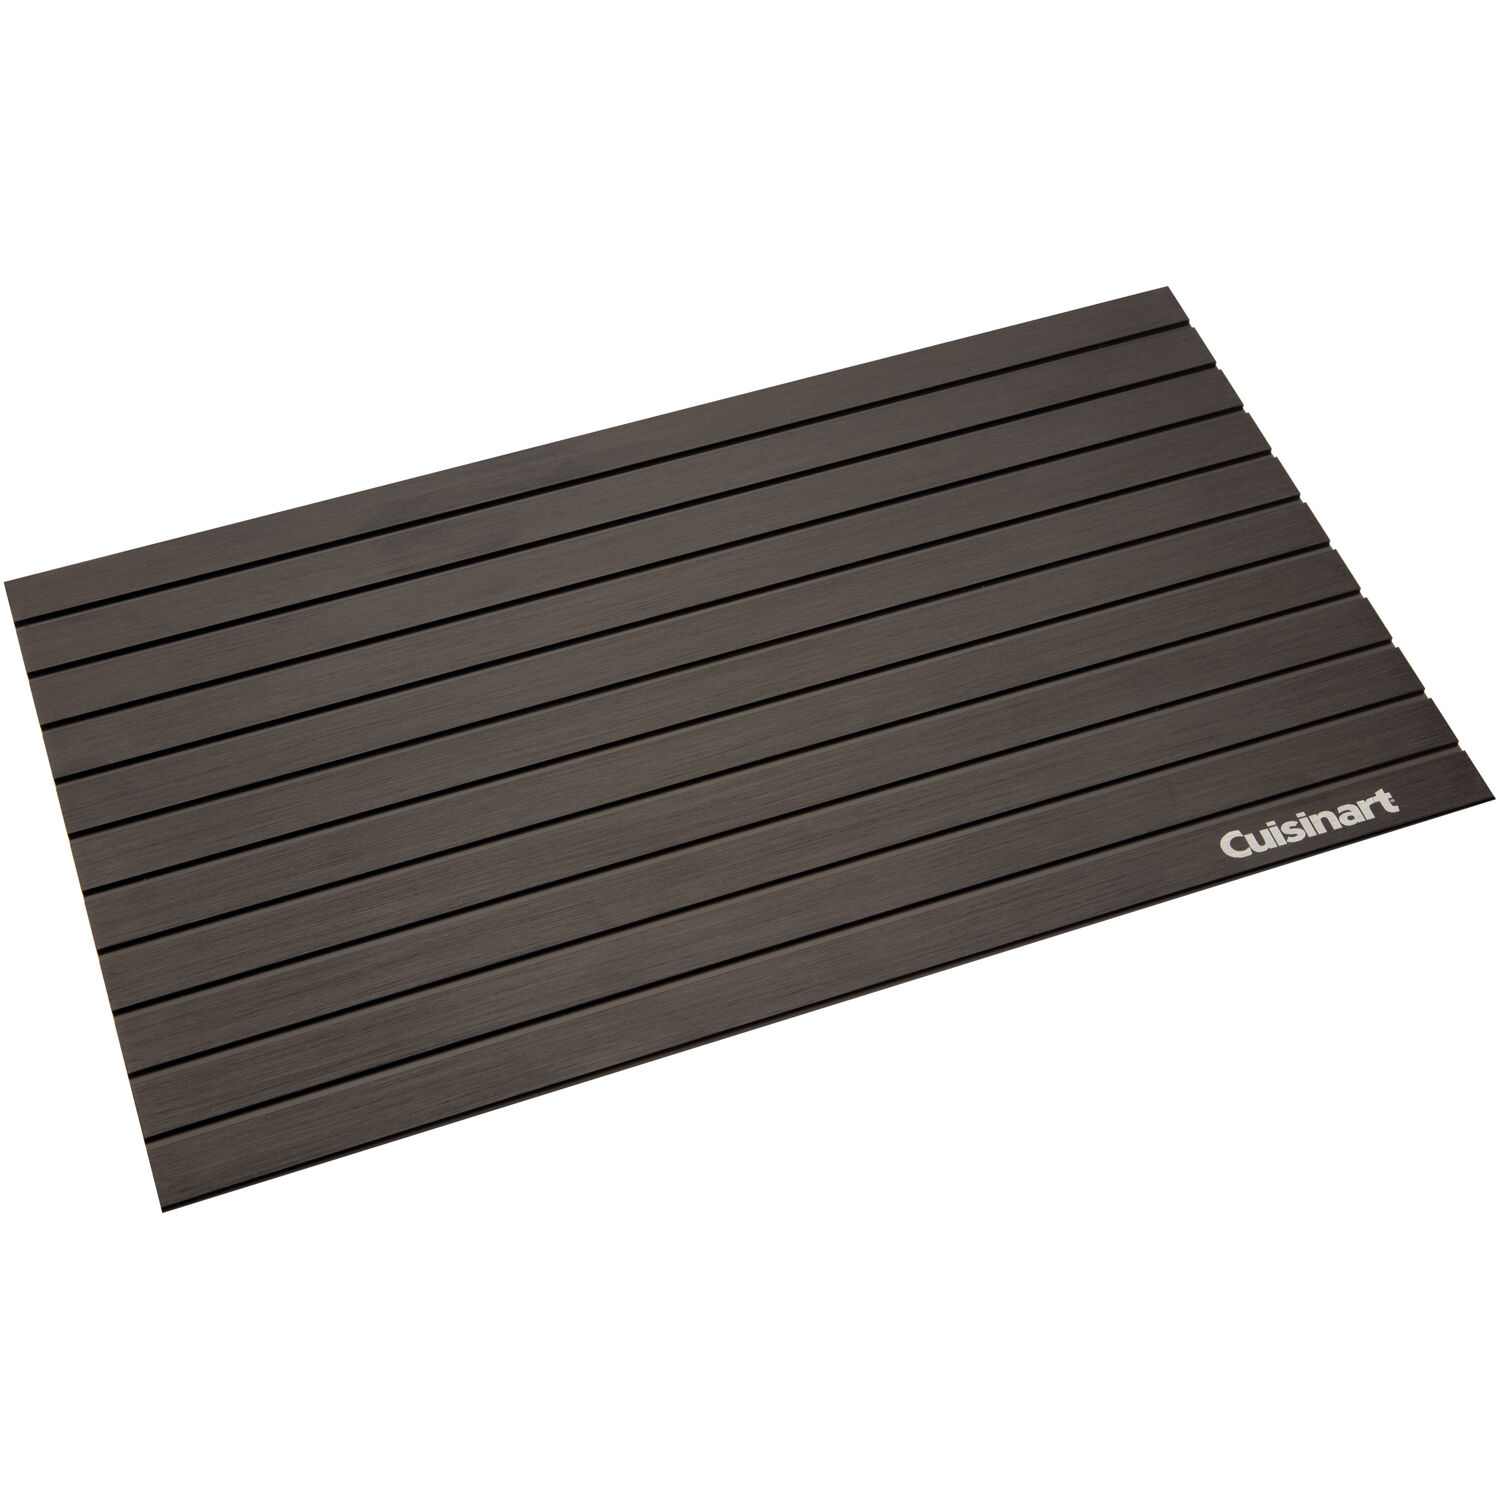 Cuisinart BBQ Defrosting Tray - image 1 of 9